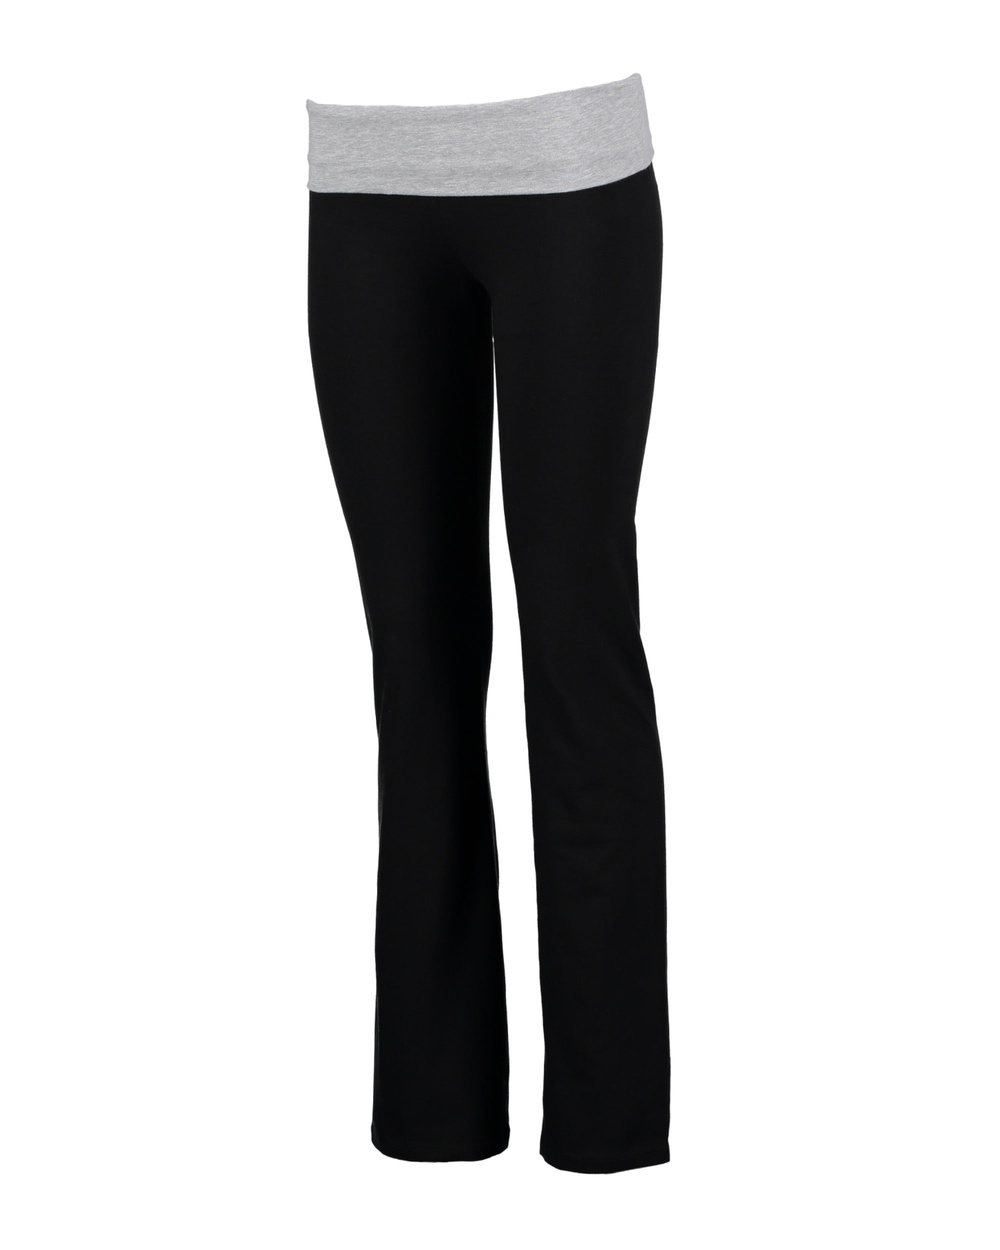 Polyester women yoga pants, Gender : female, Size : XL, XXL, 3XL, 4XL at Rs  295 / piece in Surat